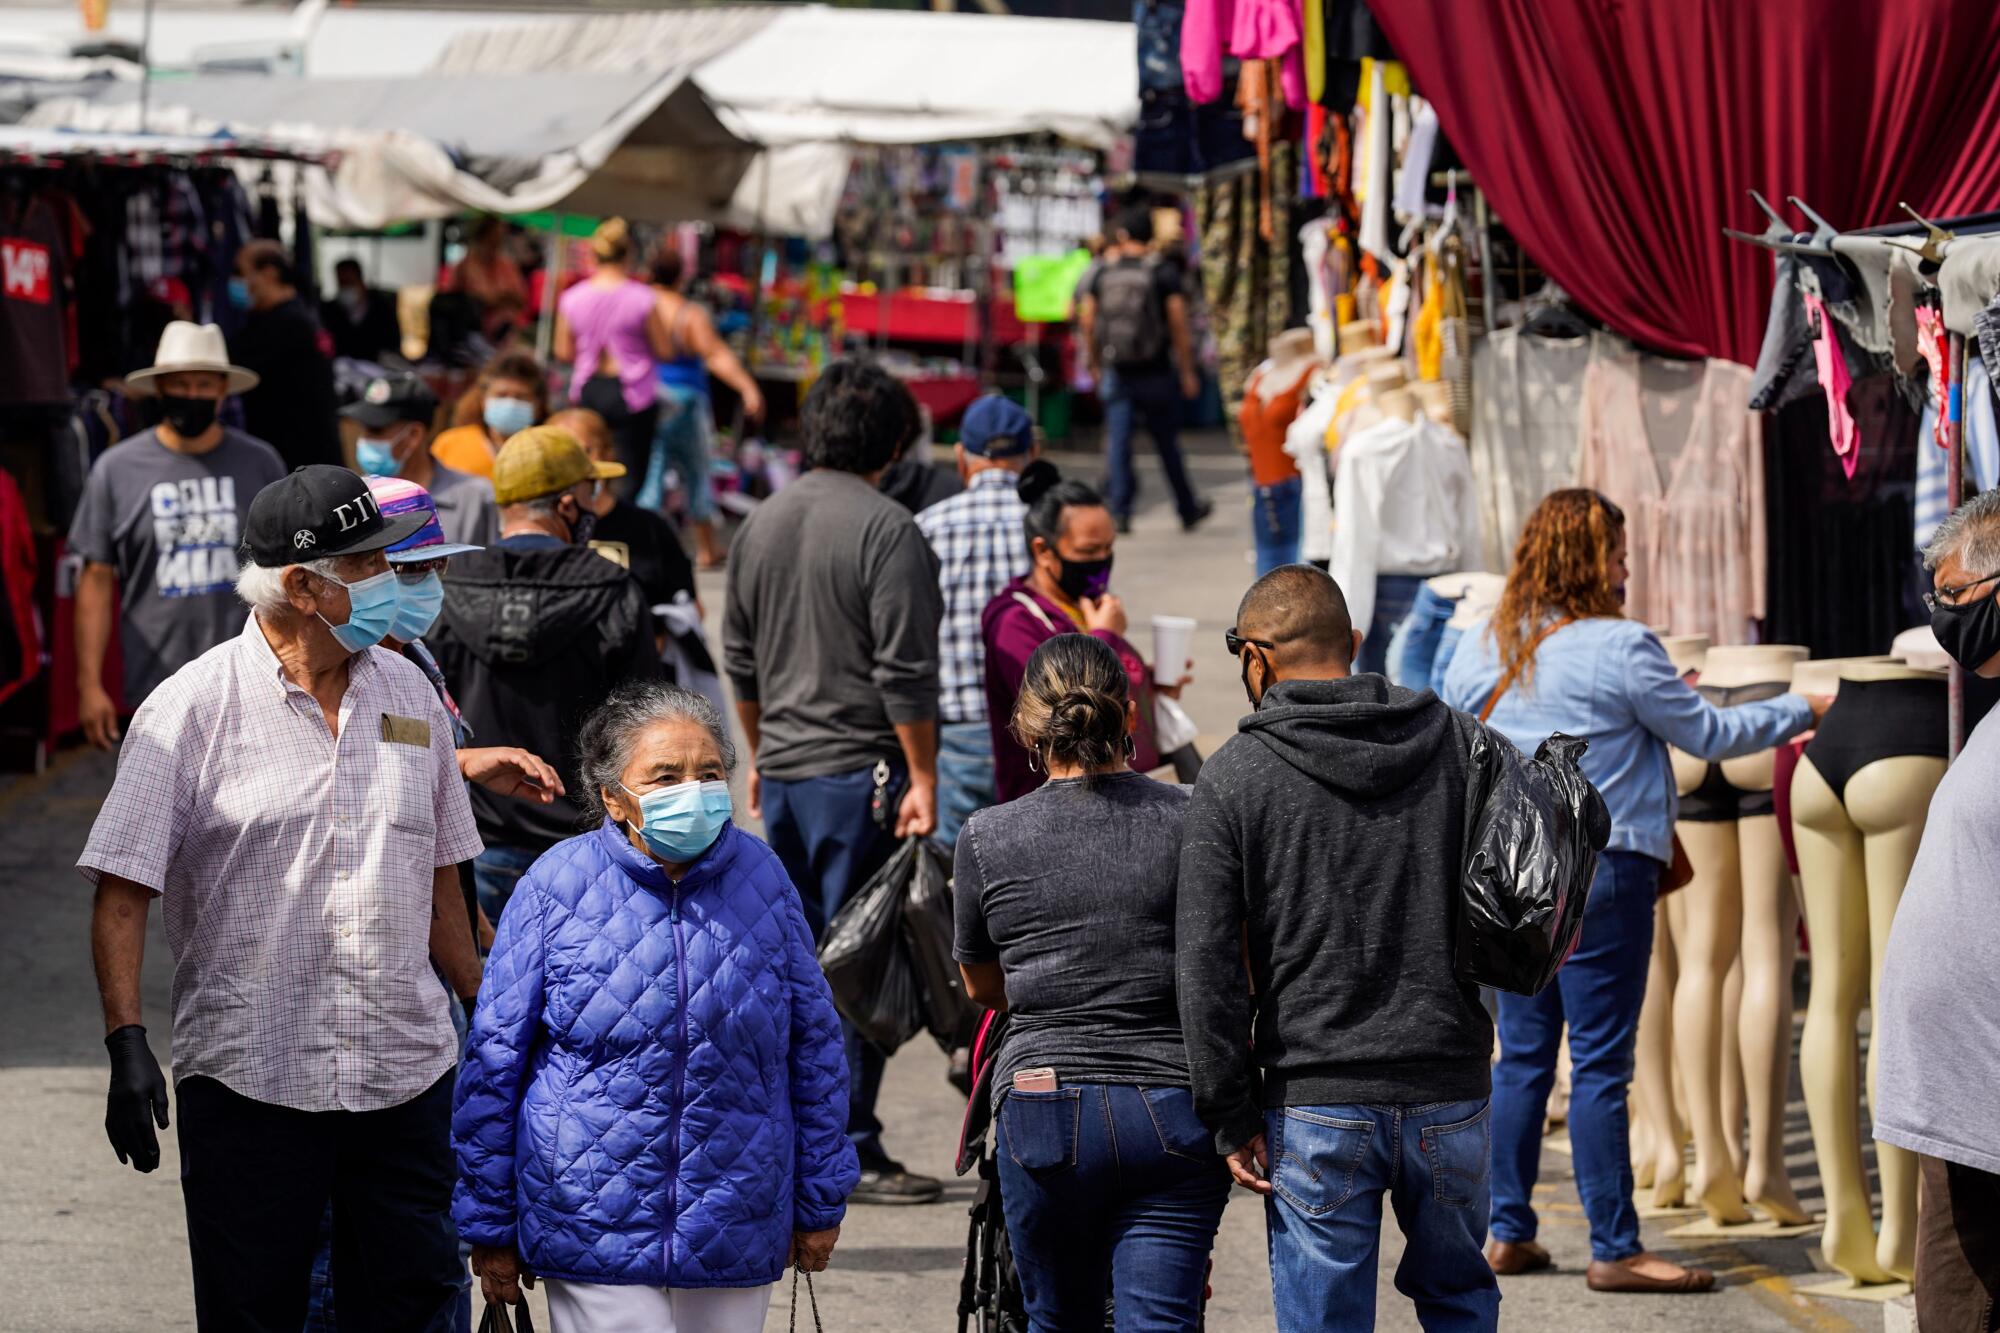 People going to the Santa Fe Springs Swap Meet are required to wear masks and maintain proper social distancing.